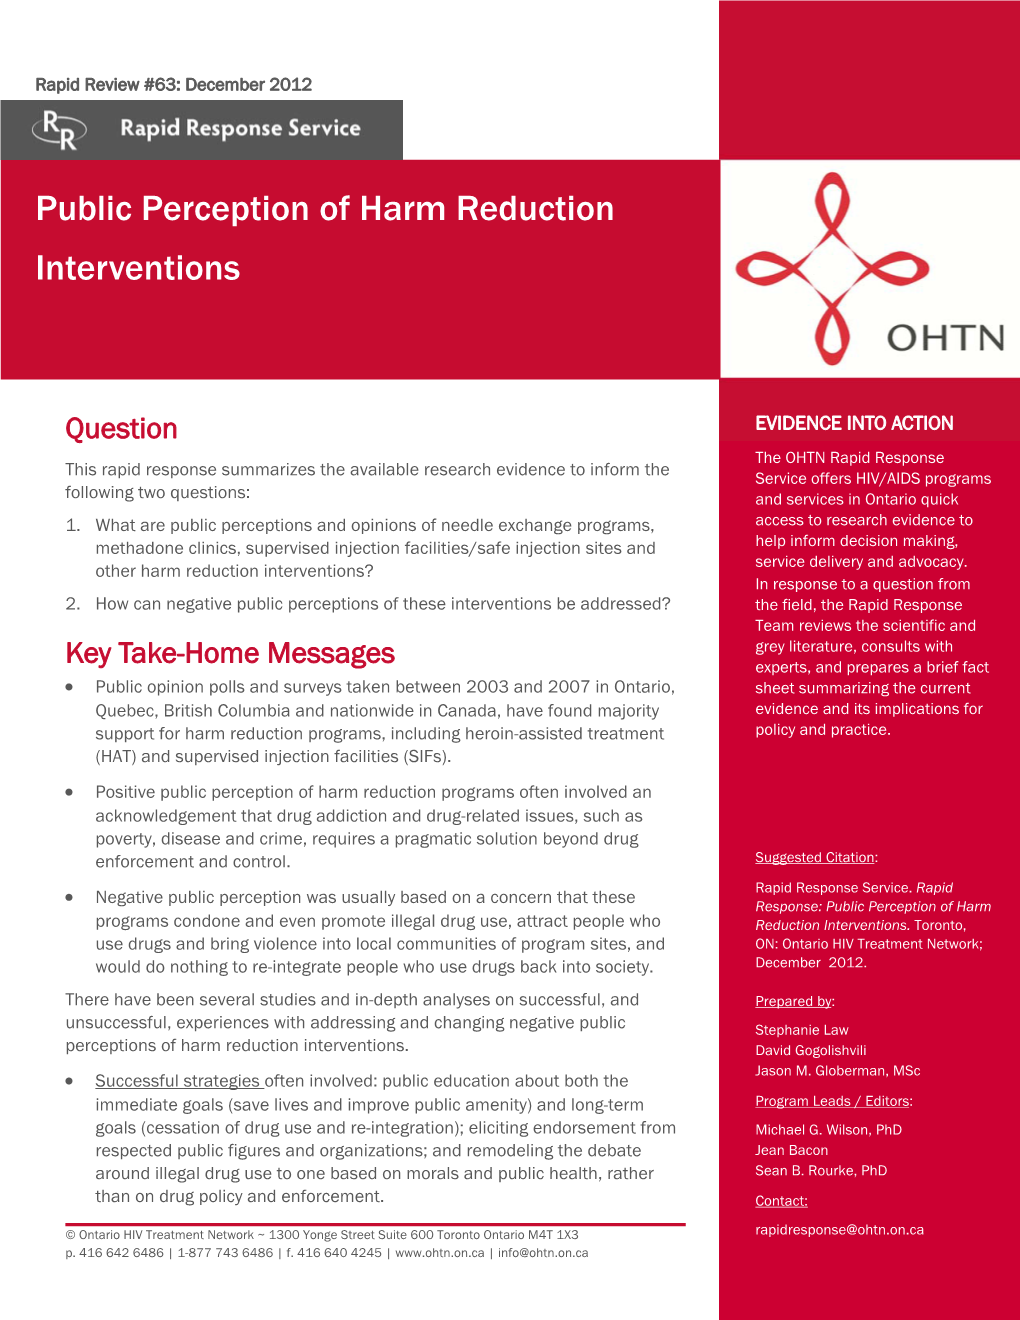 Public Perception of Harm Reduction Interventions